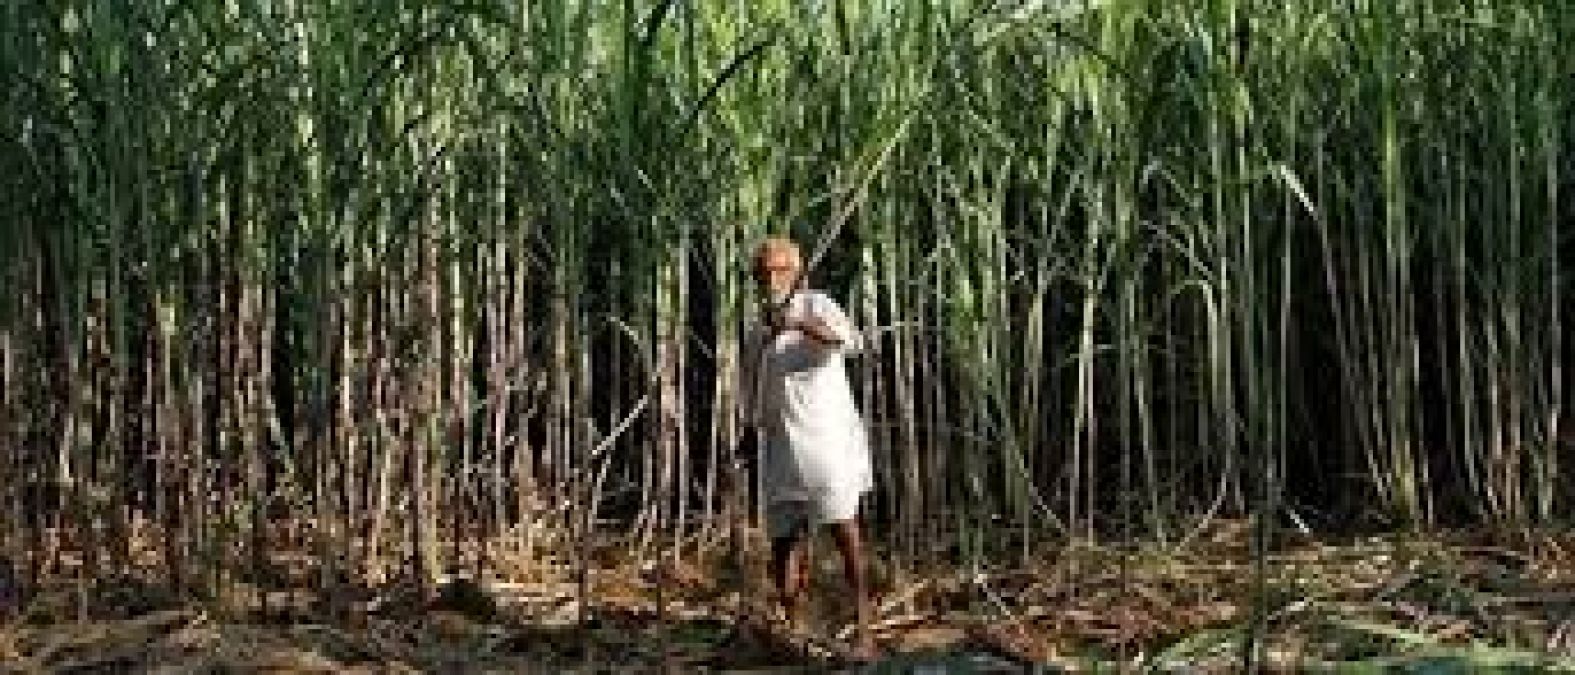 Sugar production not yet started in 64% of mills; cost may increase this season